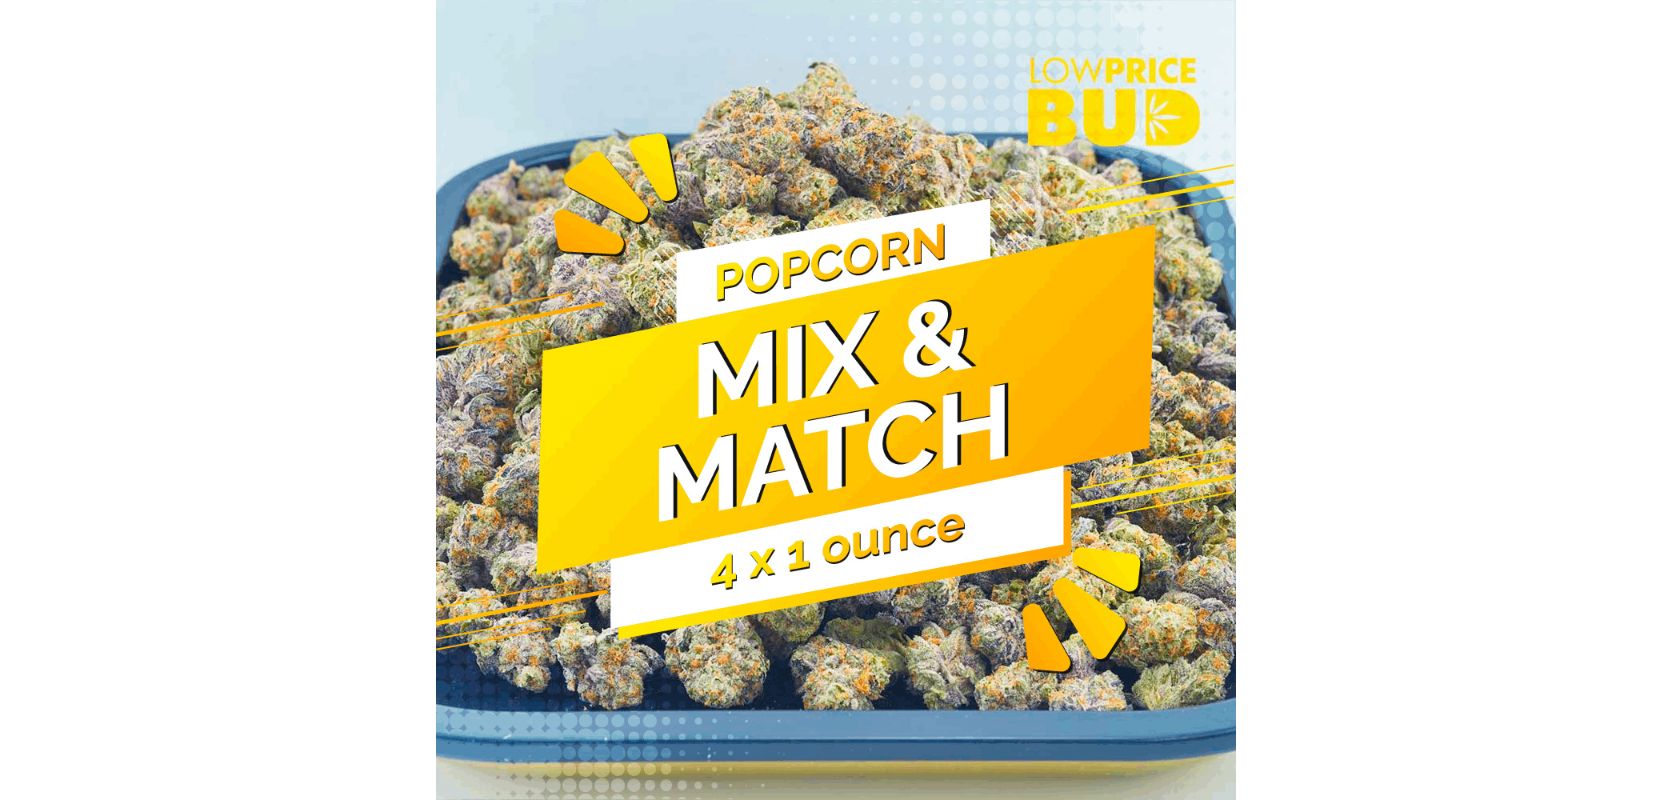 This popular snack is made with organic popcorn, coconut oil, real butter, and cannabis concentrate.